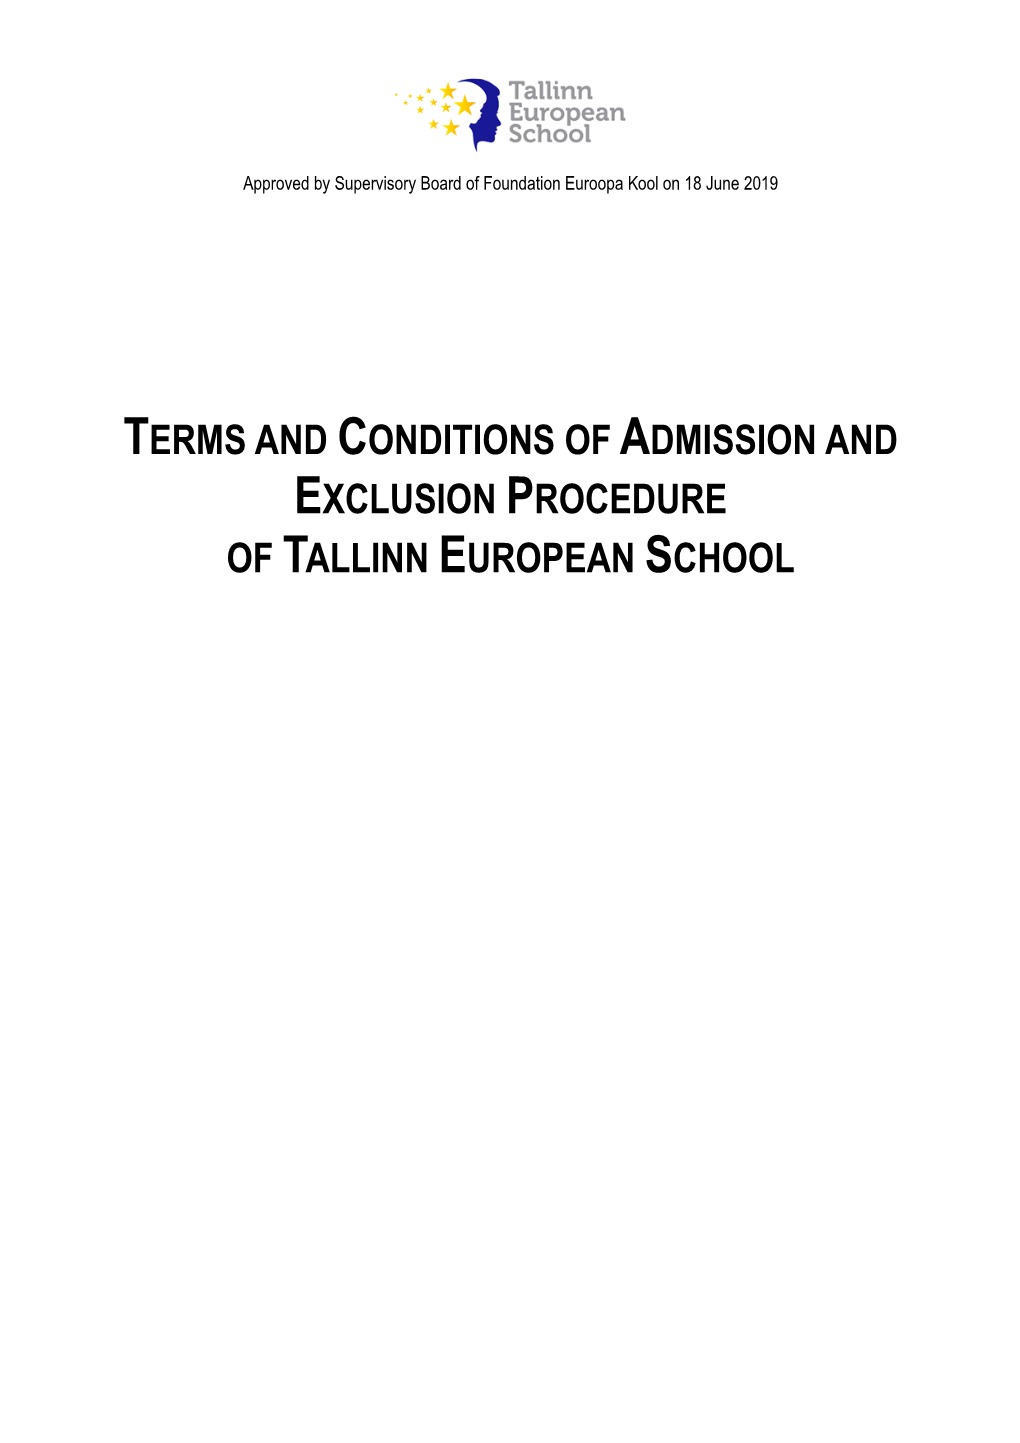 Terms and Conditions of Admission and Exclusion Procedure of Tallinn European School